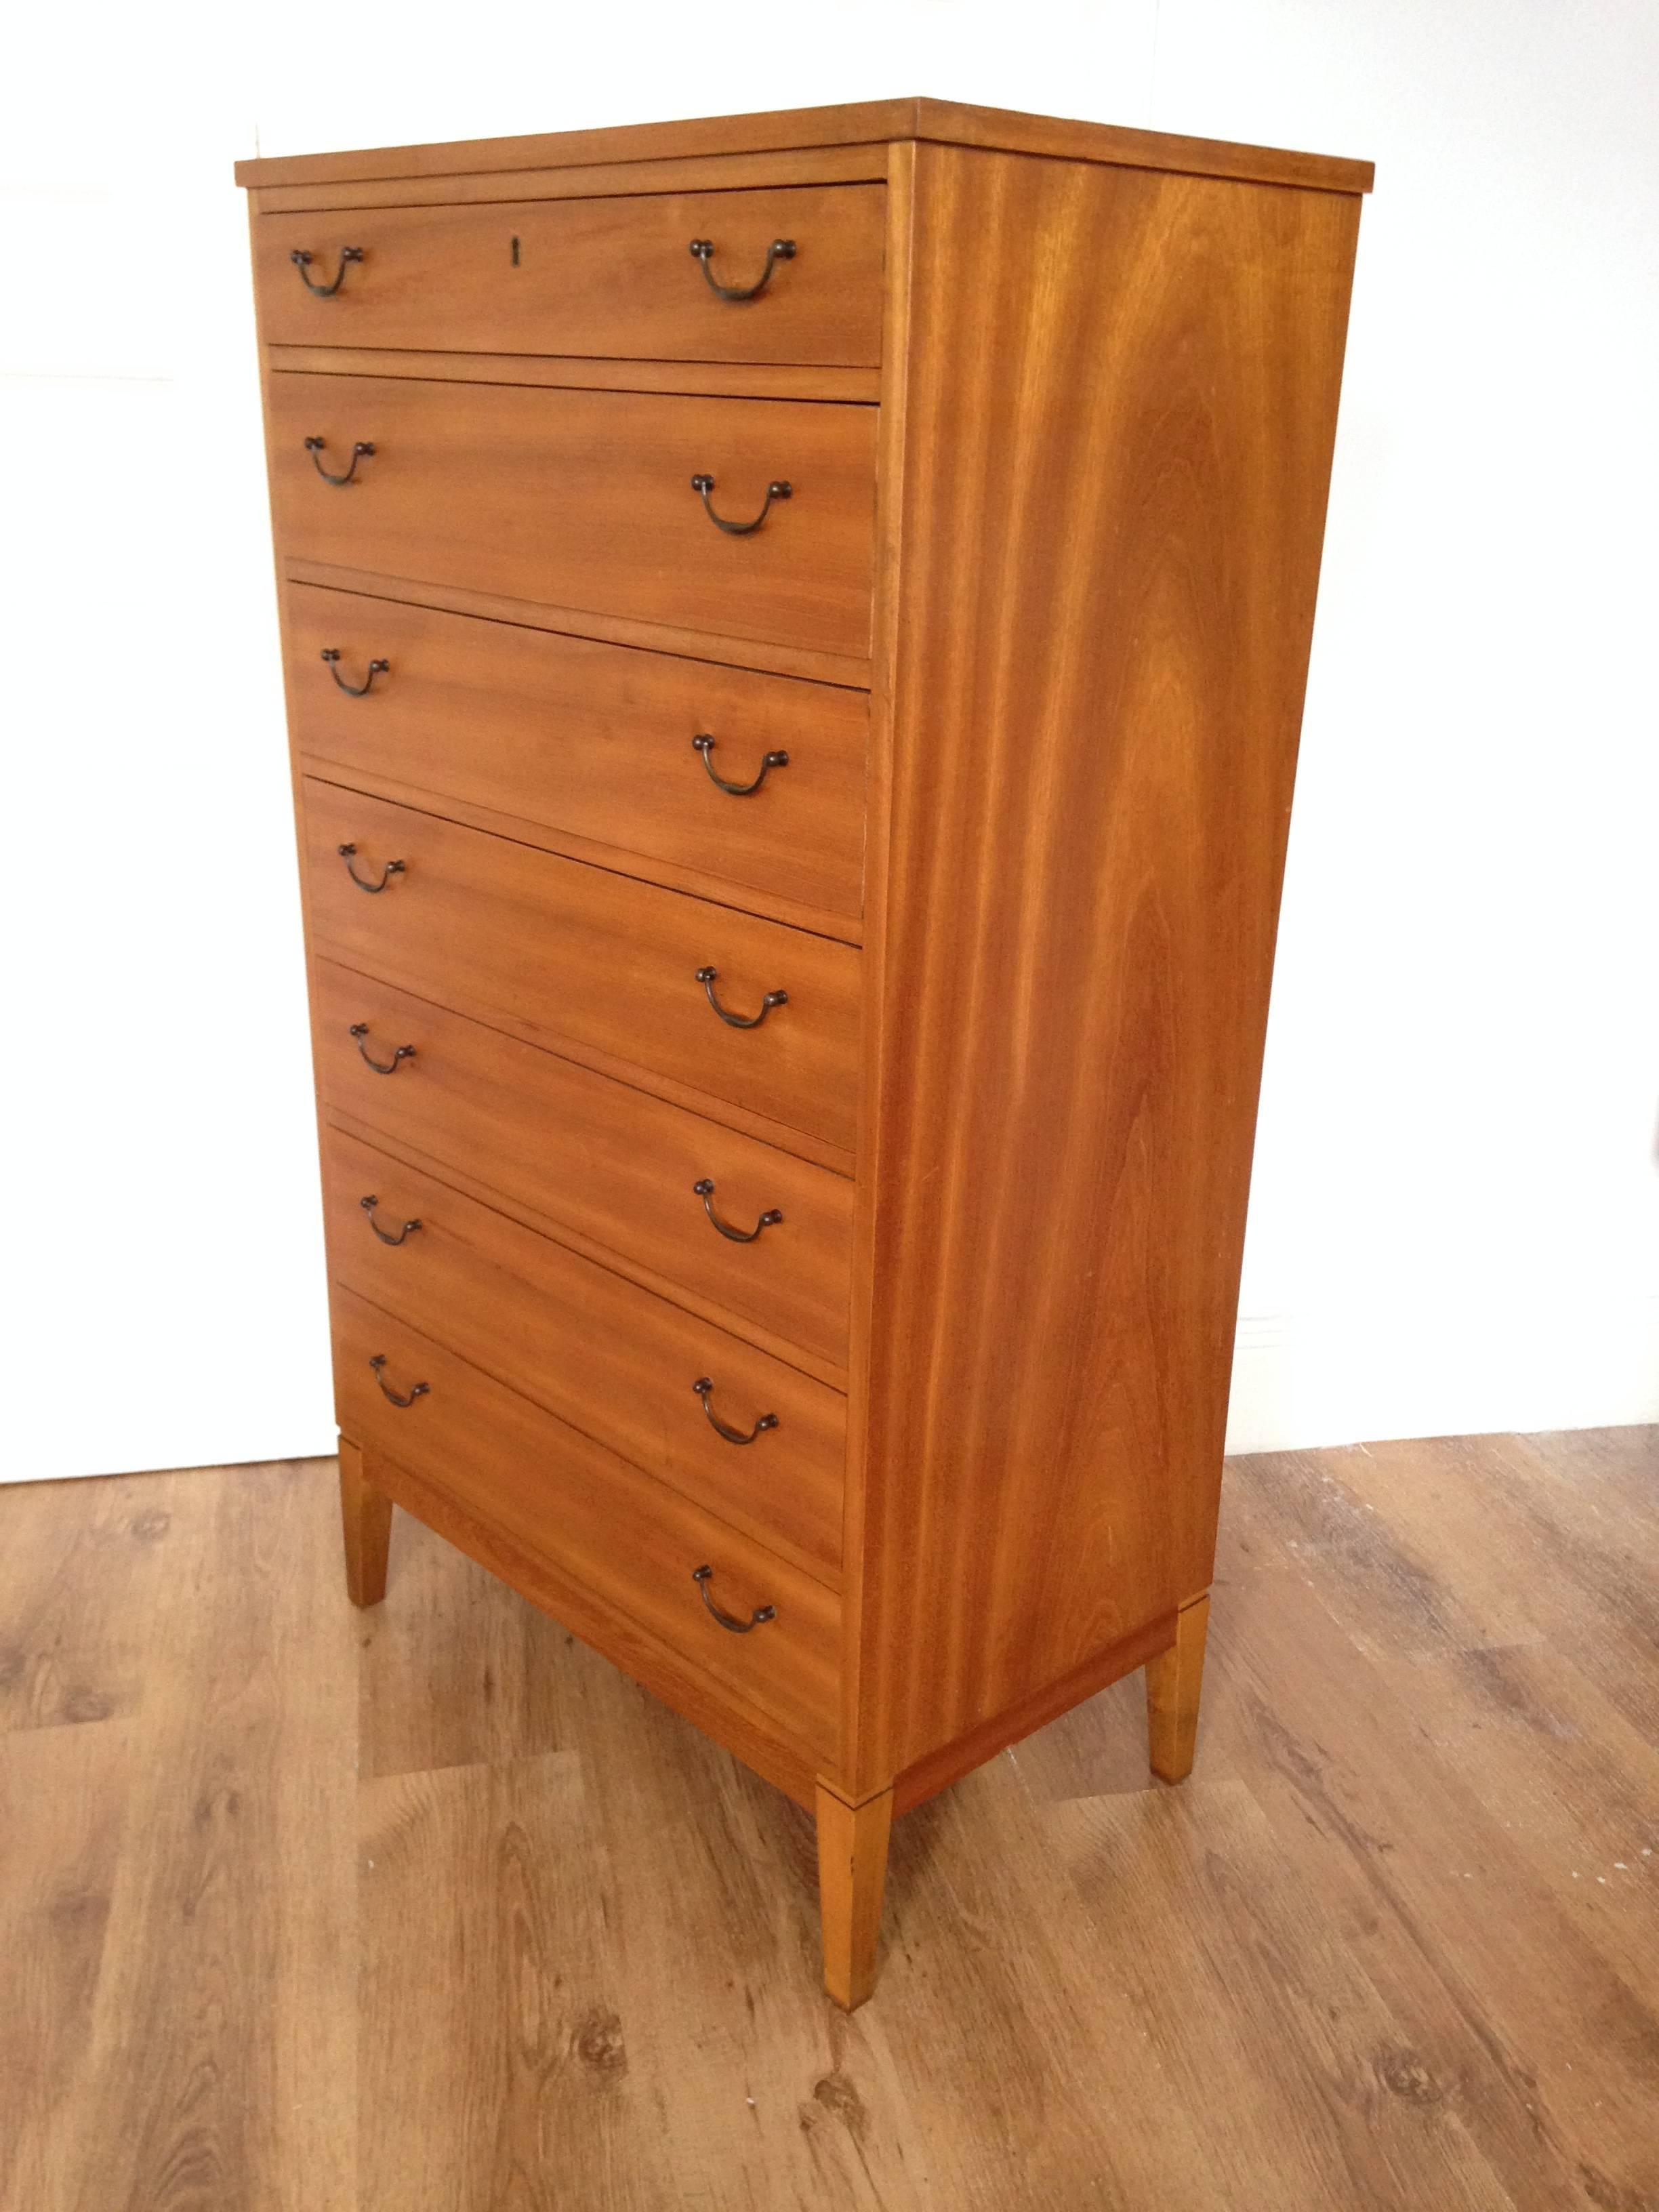 20th Century Danish Commode Mid-Century Modern Chest of Drawers by Soborg Mobler For Sale